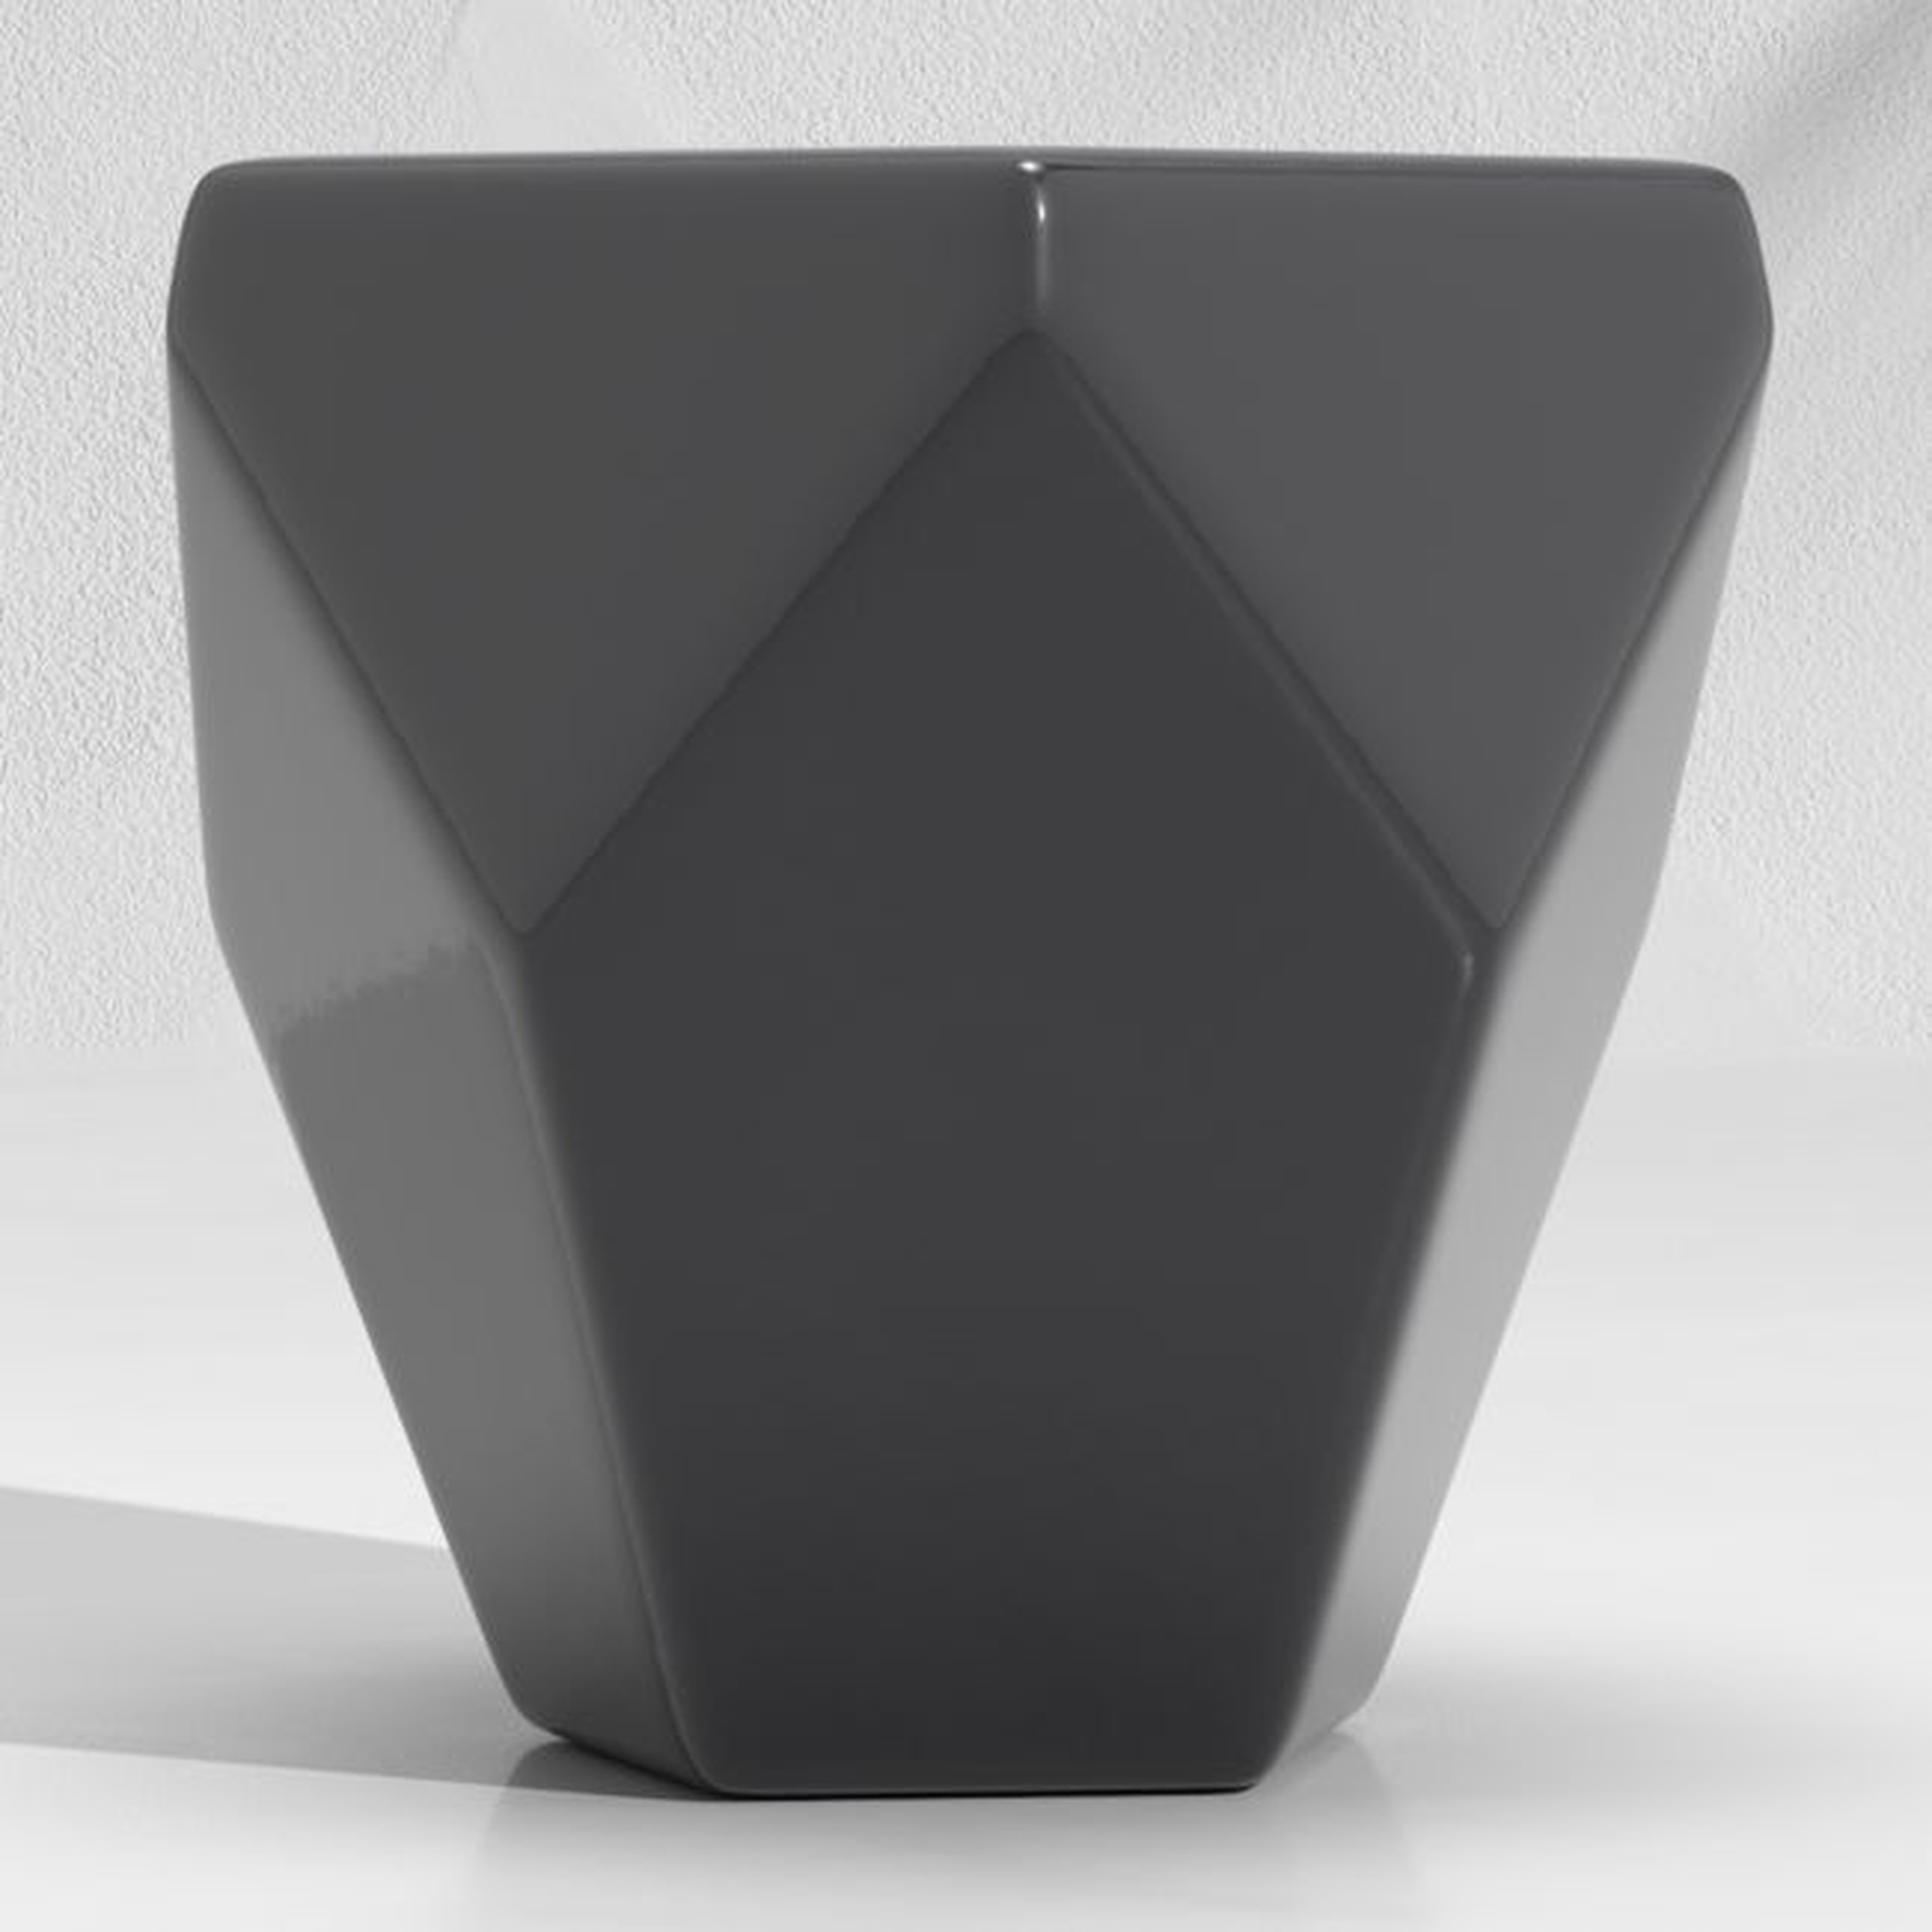 Faceted Black End Table - Crate and Barrel